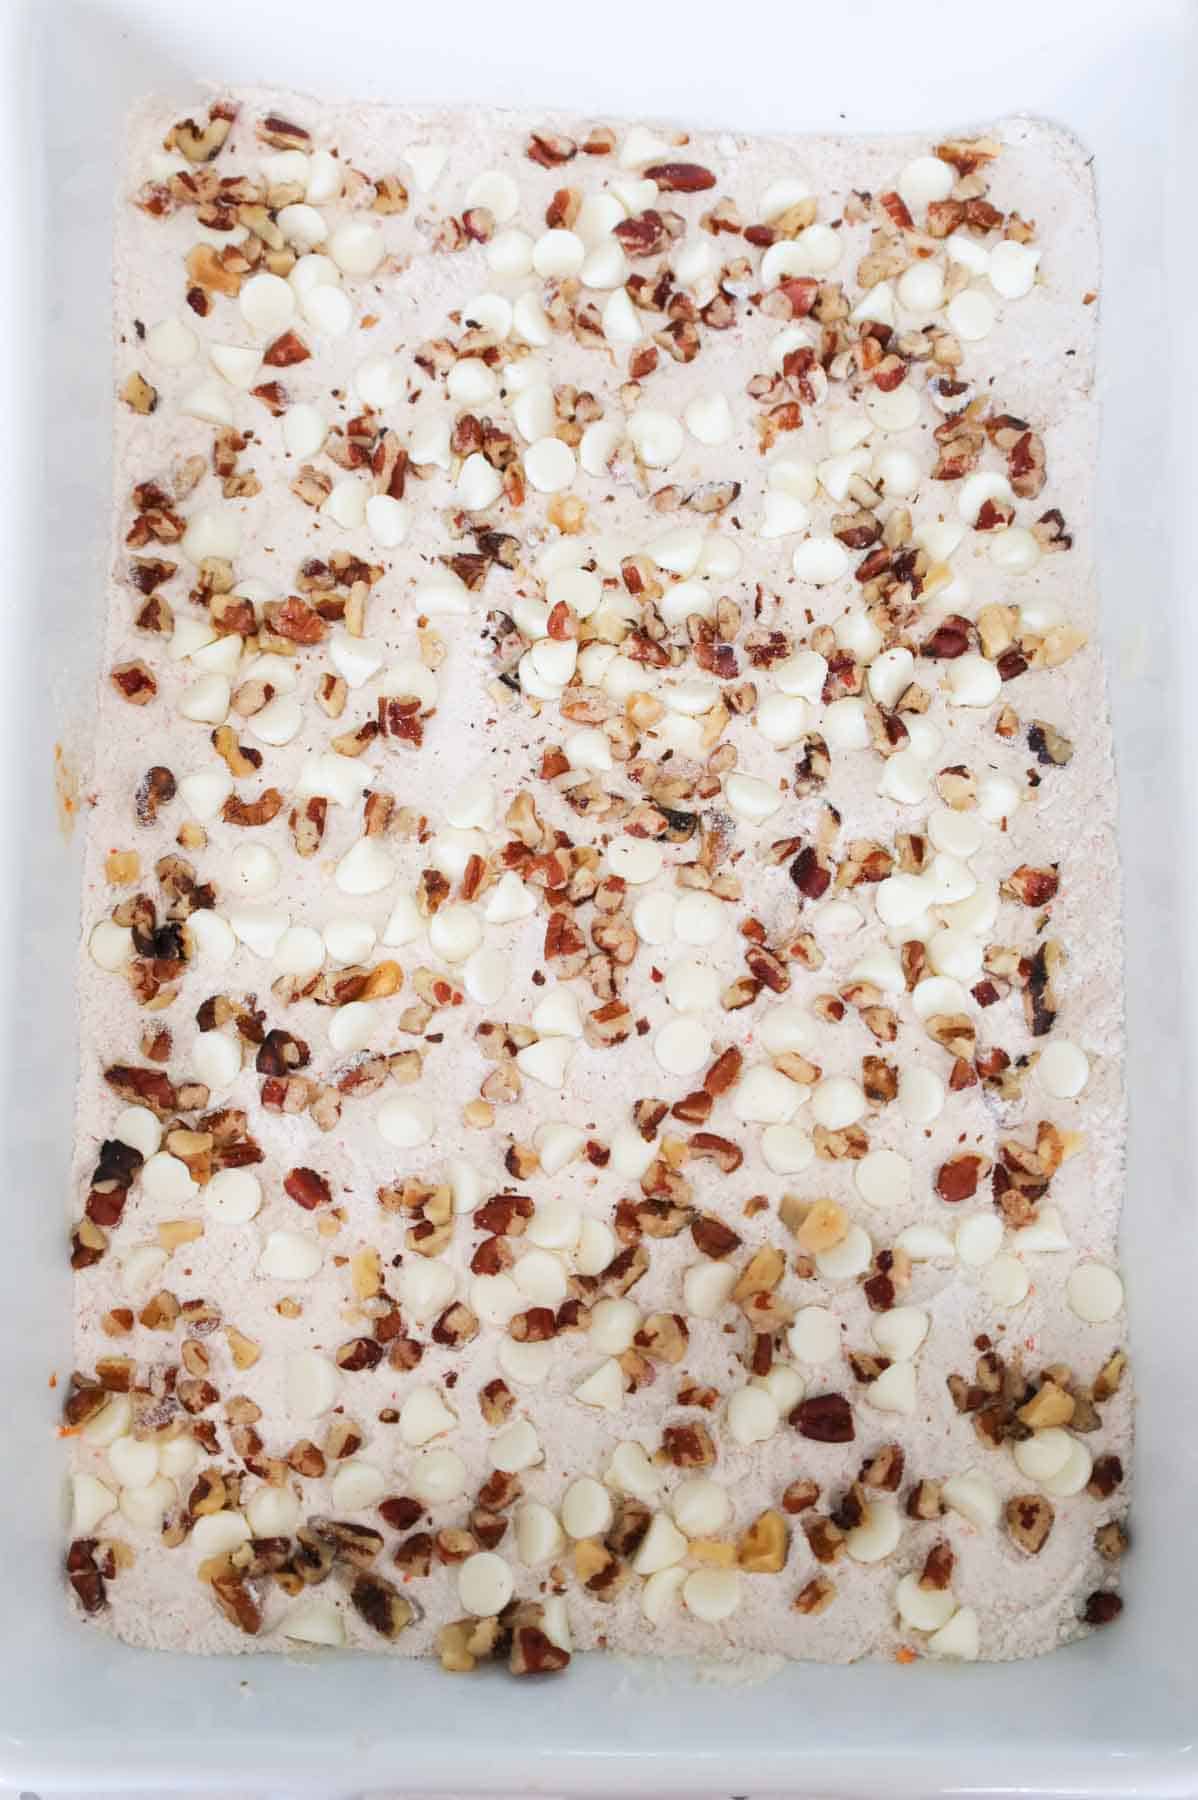 chopped pecans and cream cheese flavoured baking bits on top of dry carrot cake mix in a baking dish